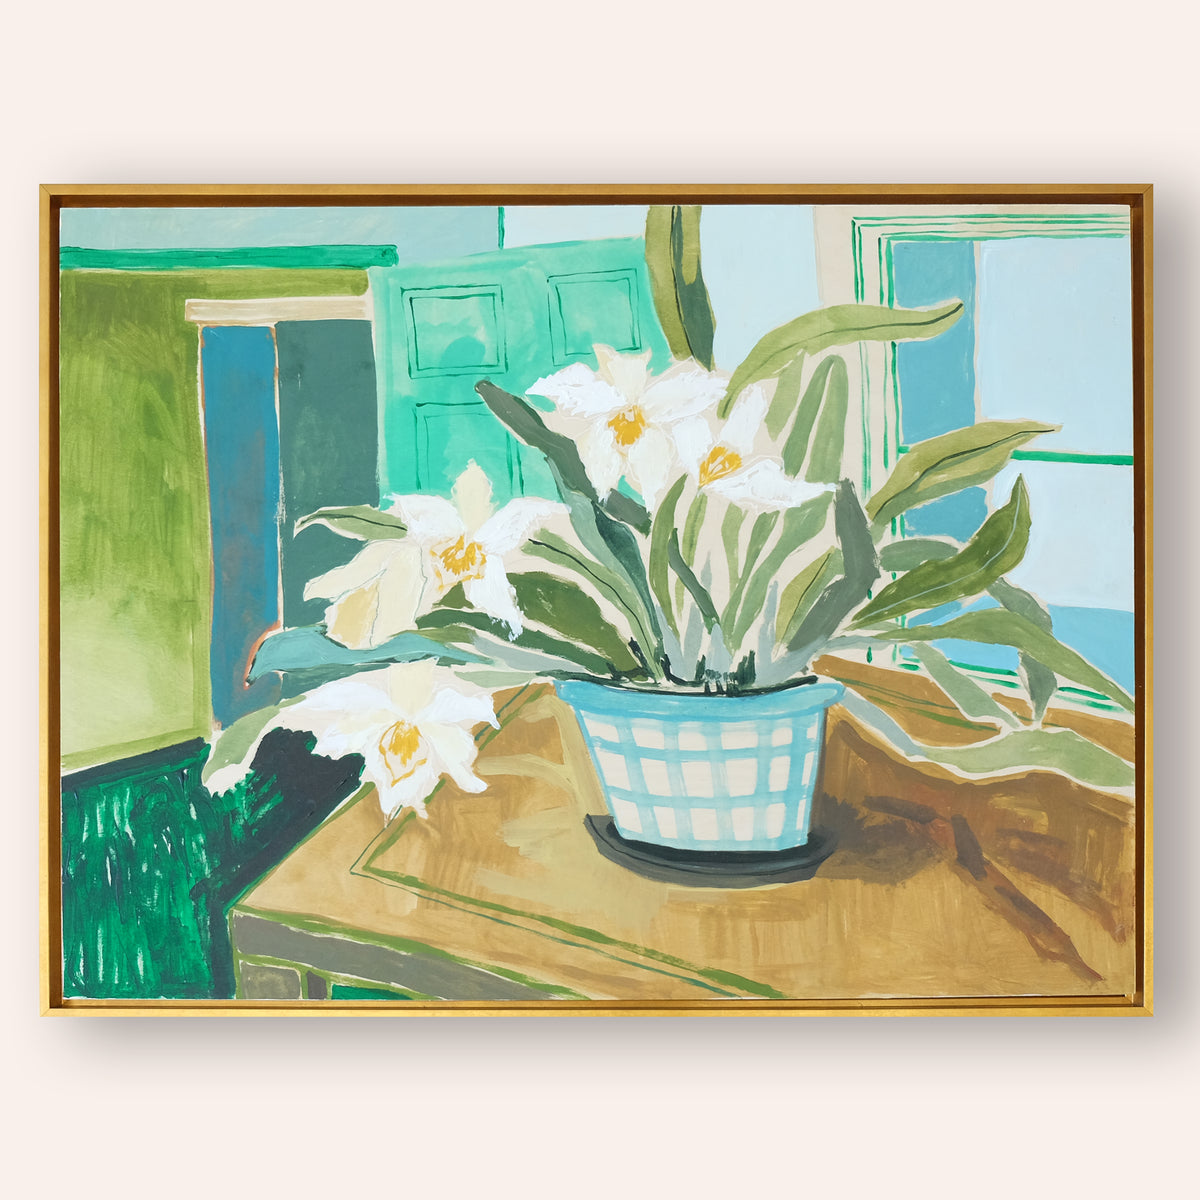 Potted Orchid No. 11 - 30 x 40